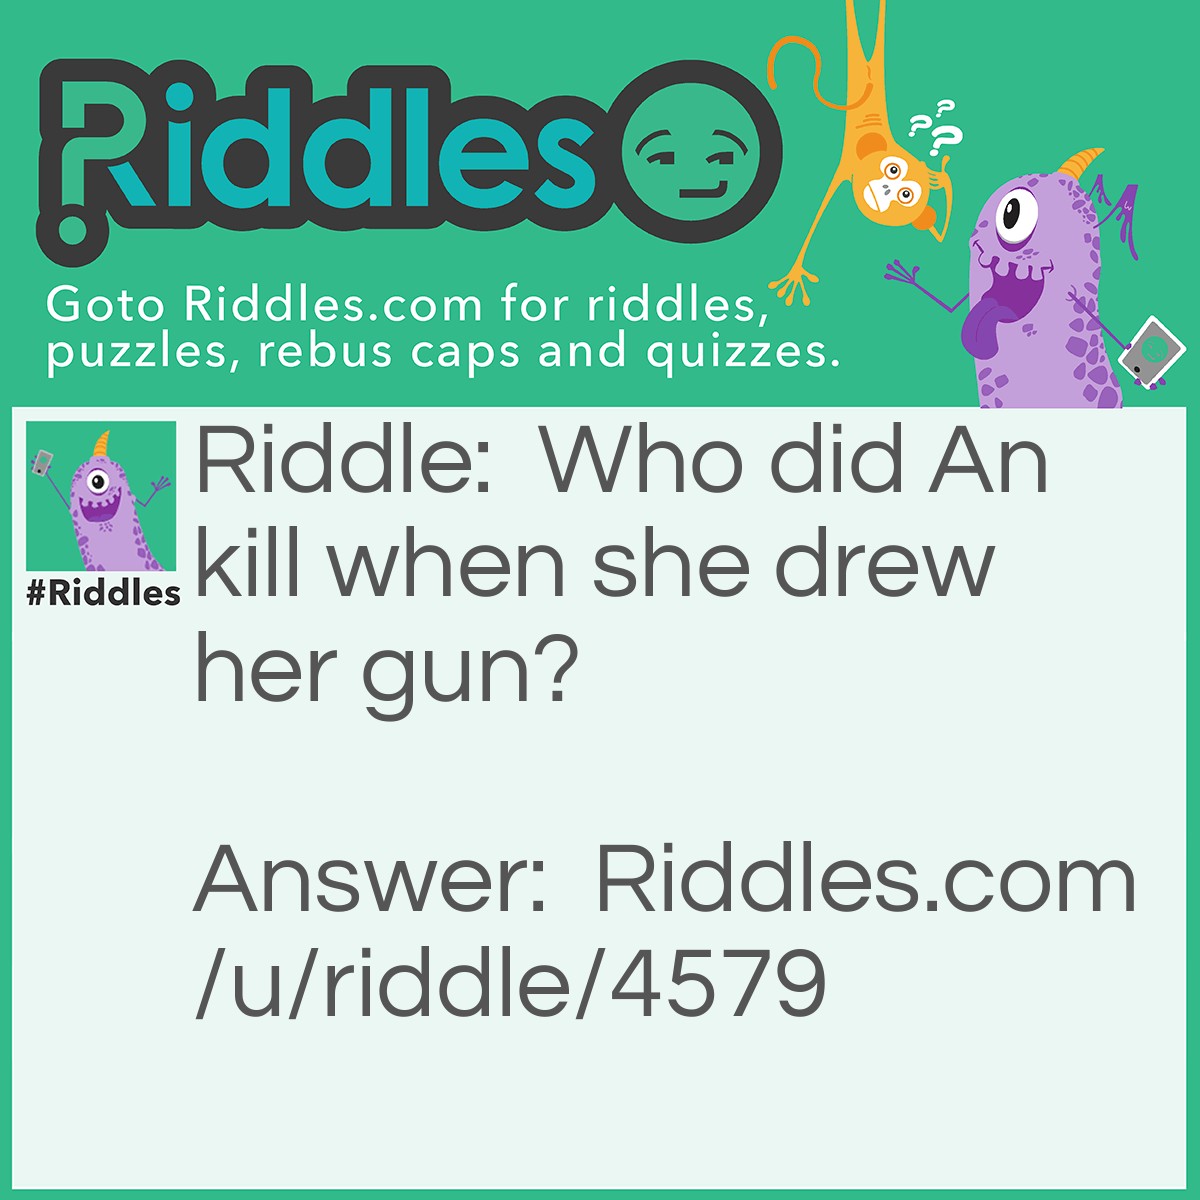 Riddle: Who did An kill when she drew her gun? Answer: Andrew.